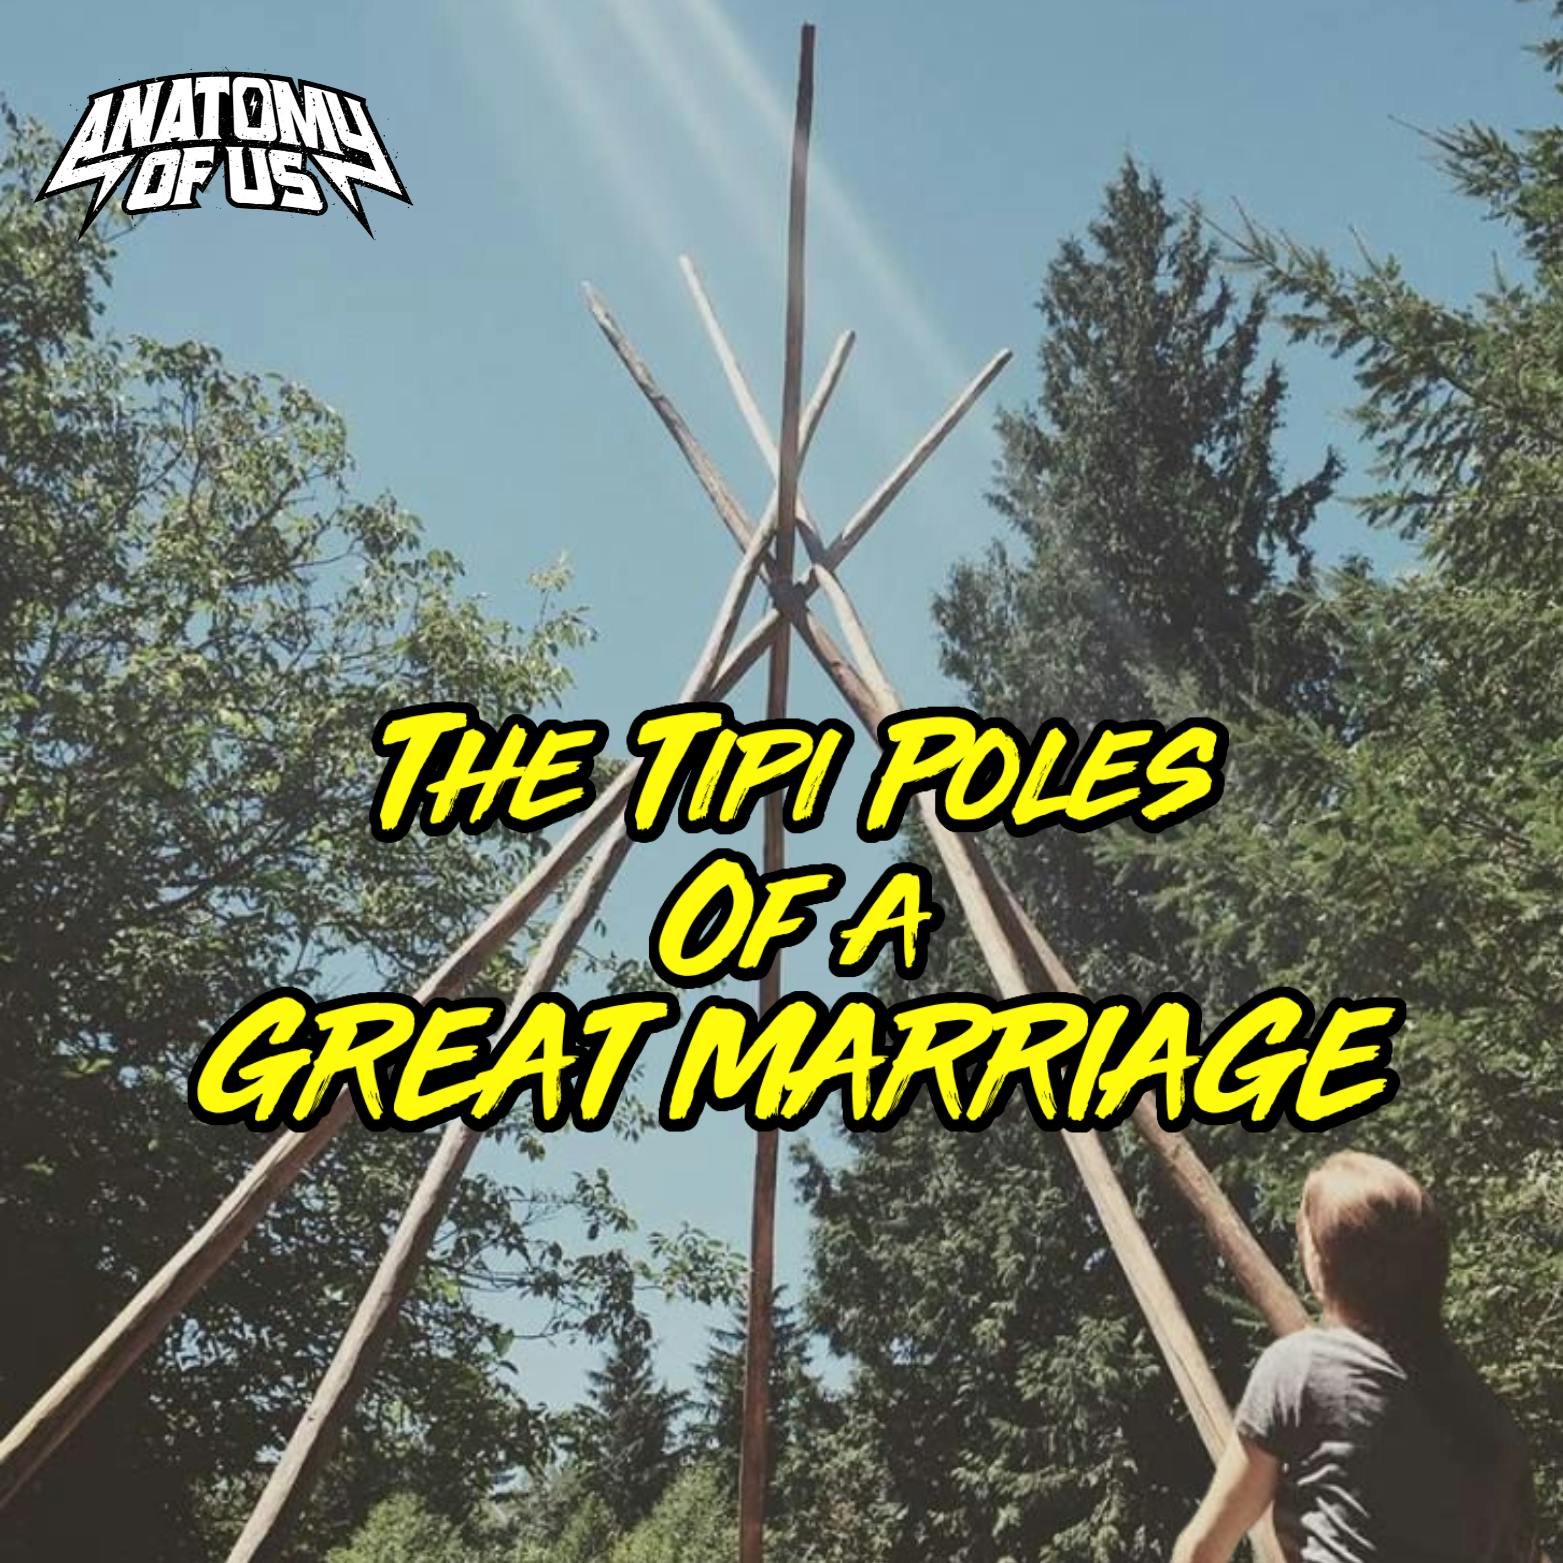 The Tipi Poles of a Great Marriage